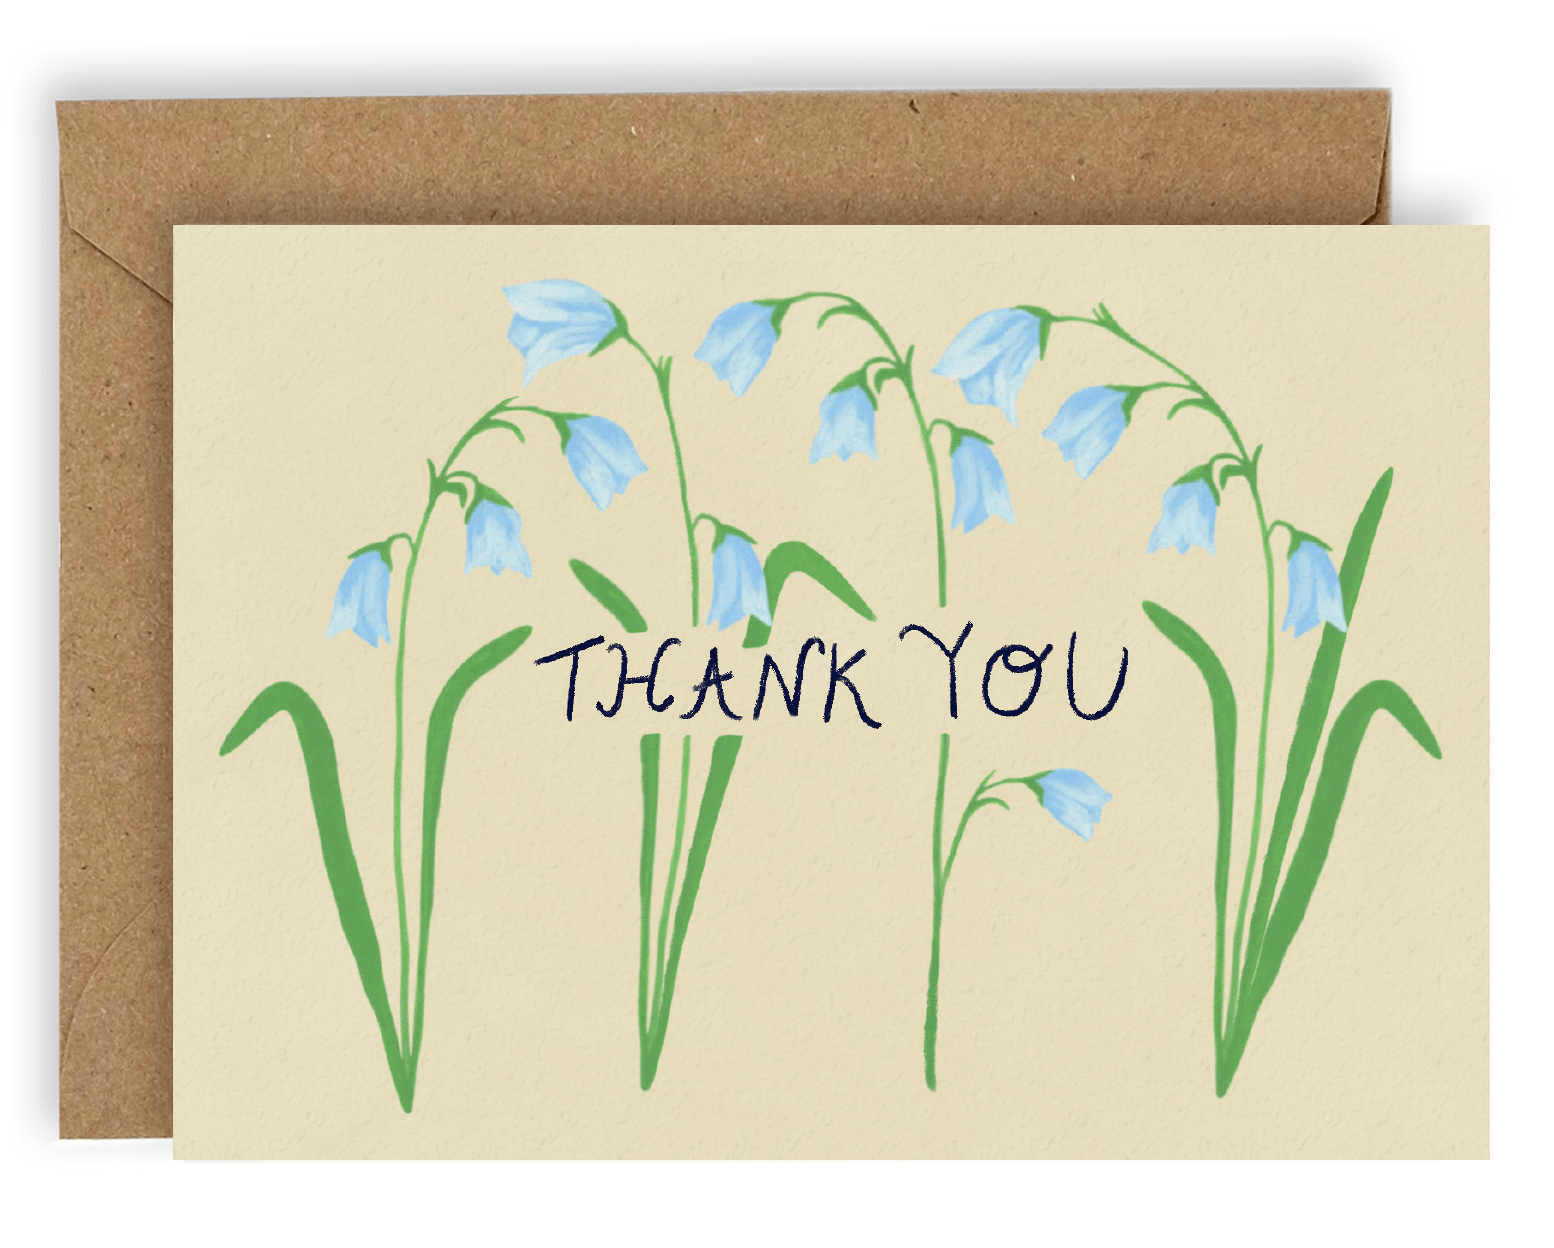 Four drooping blue forest flowers cover the card nearly top to bottom horizontally, with the words &quot;Thank You&quot; going through the center of them in black ink. This design is printed on a cream colored background. Shown with Kraft envelope.